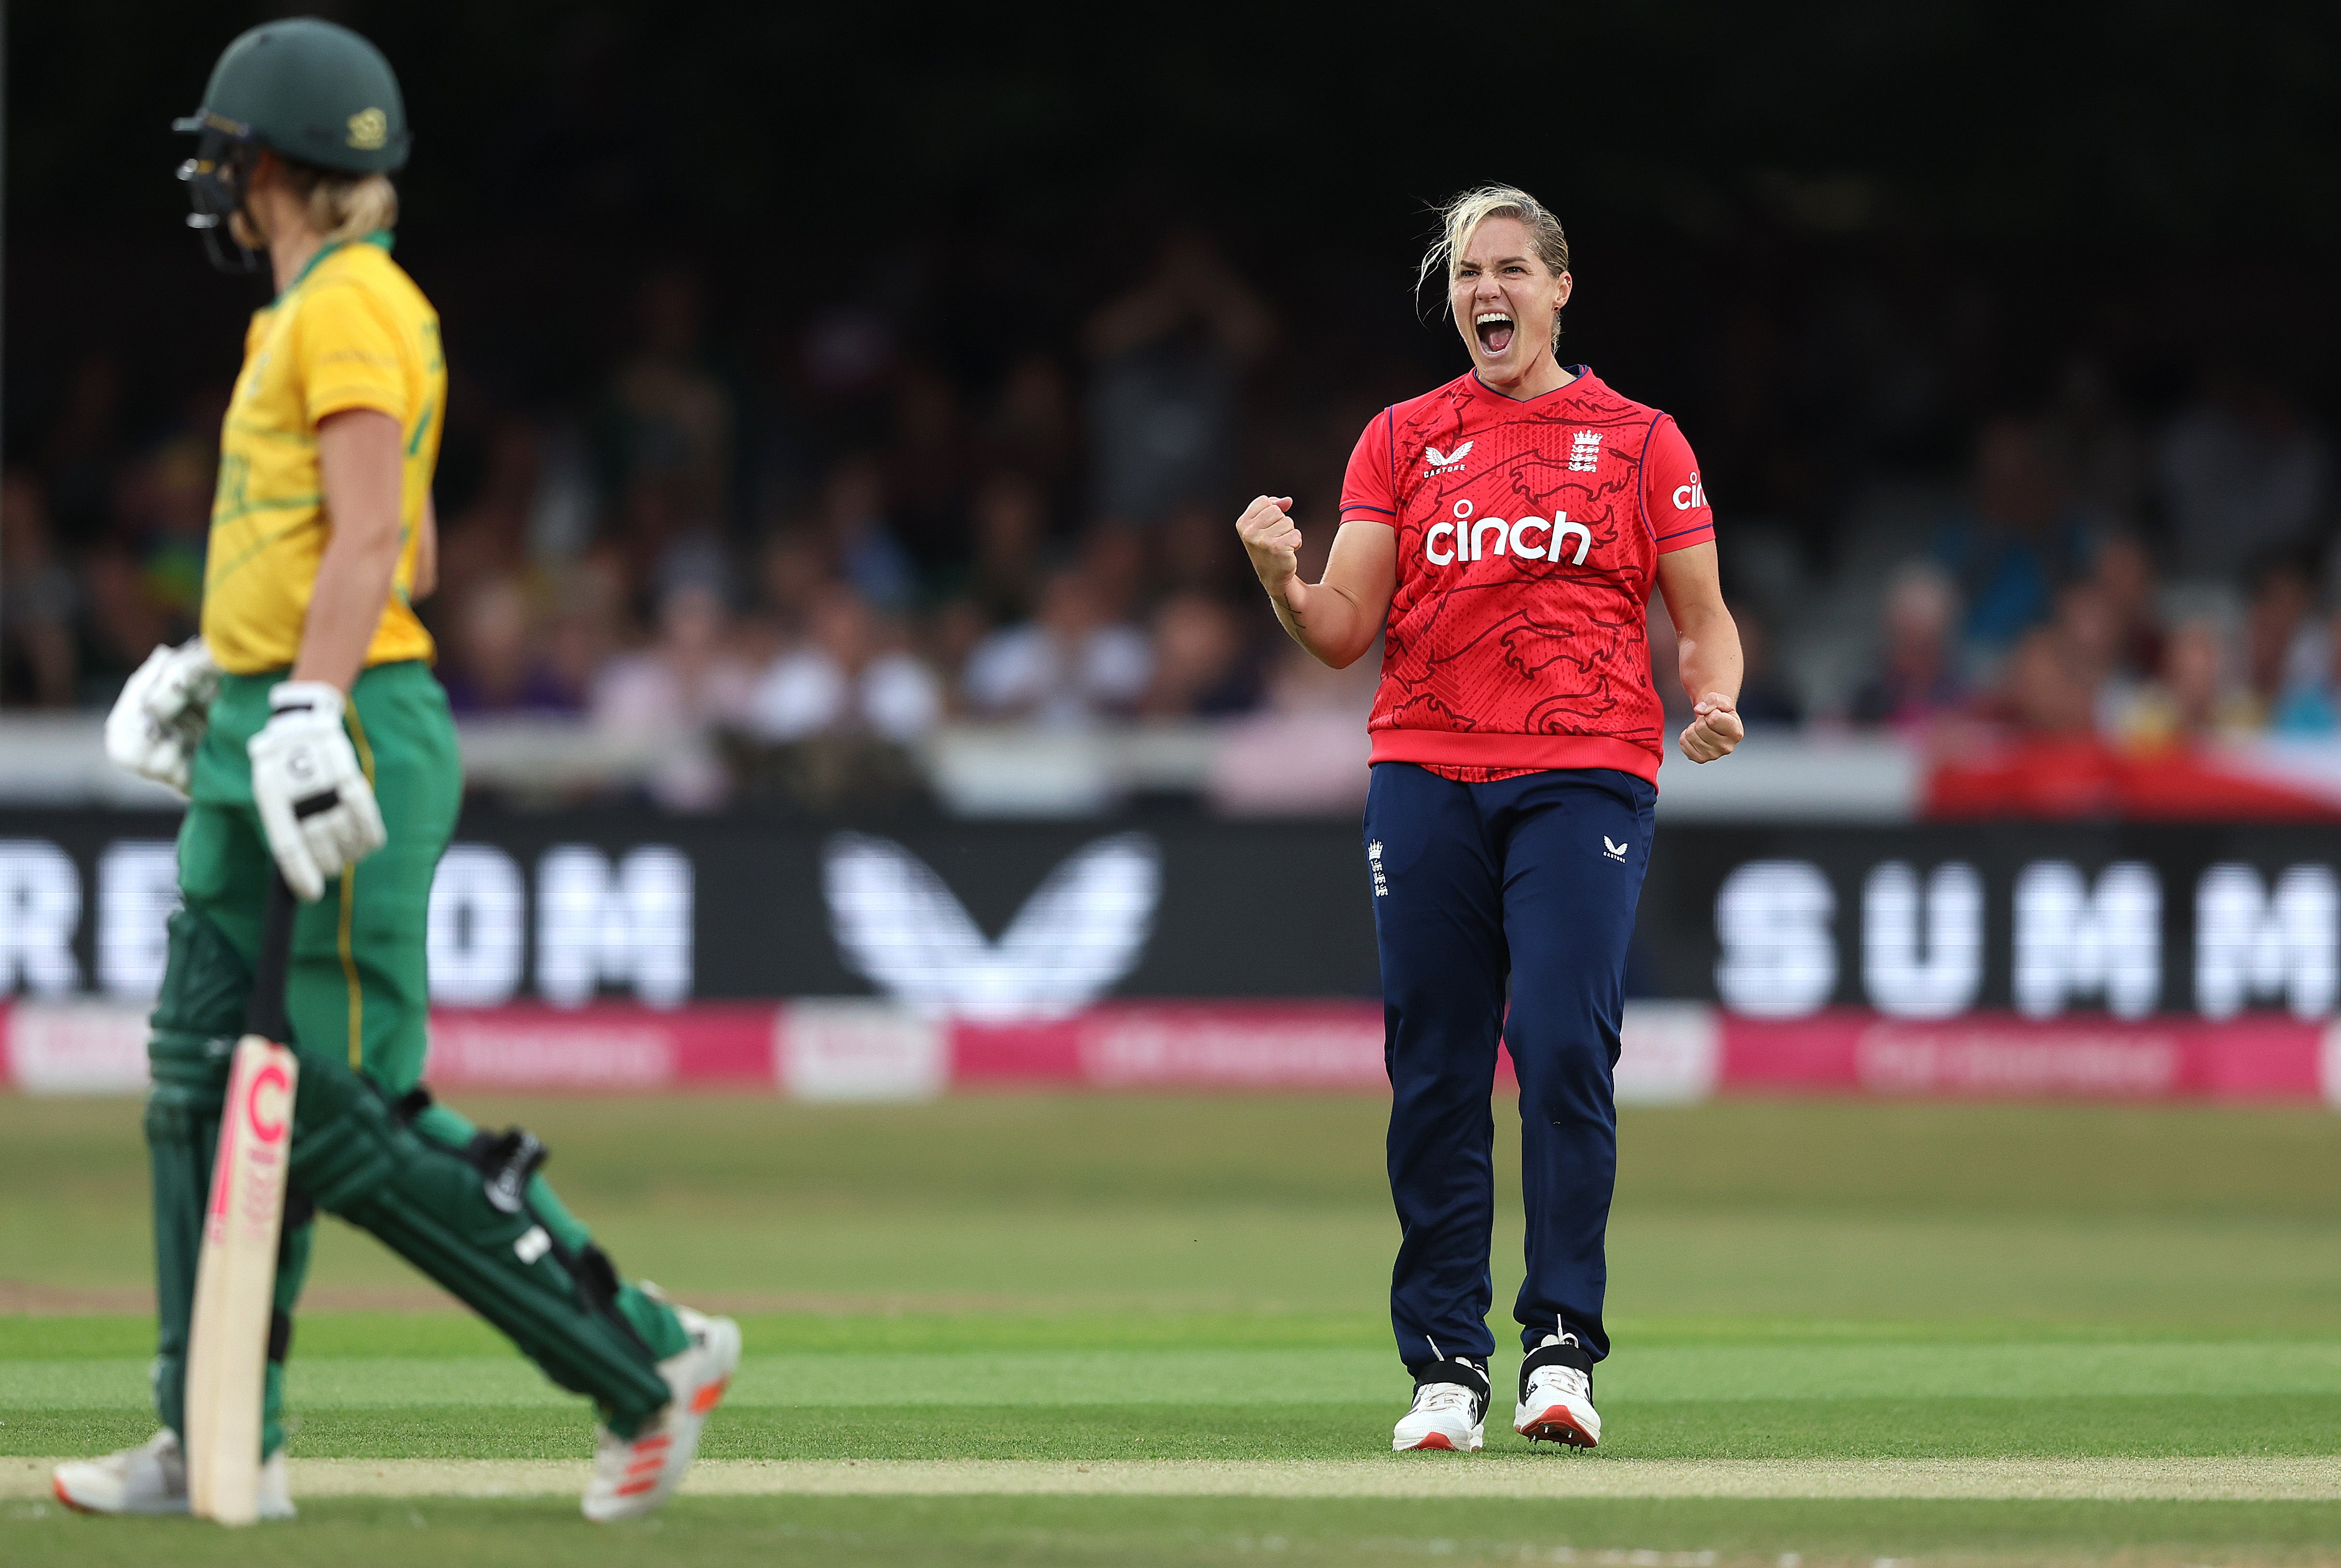 Katherine Sciver-Brunt has announced her retirement from international cricket (Getty Images)